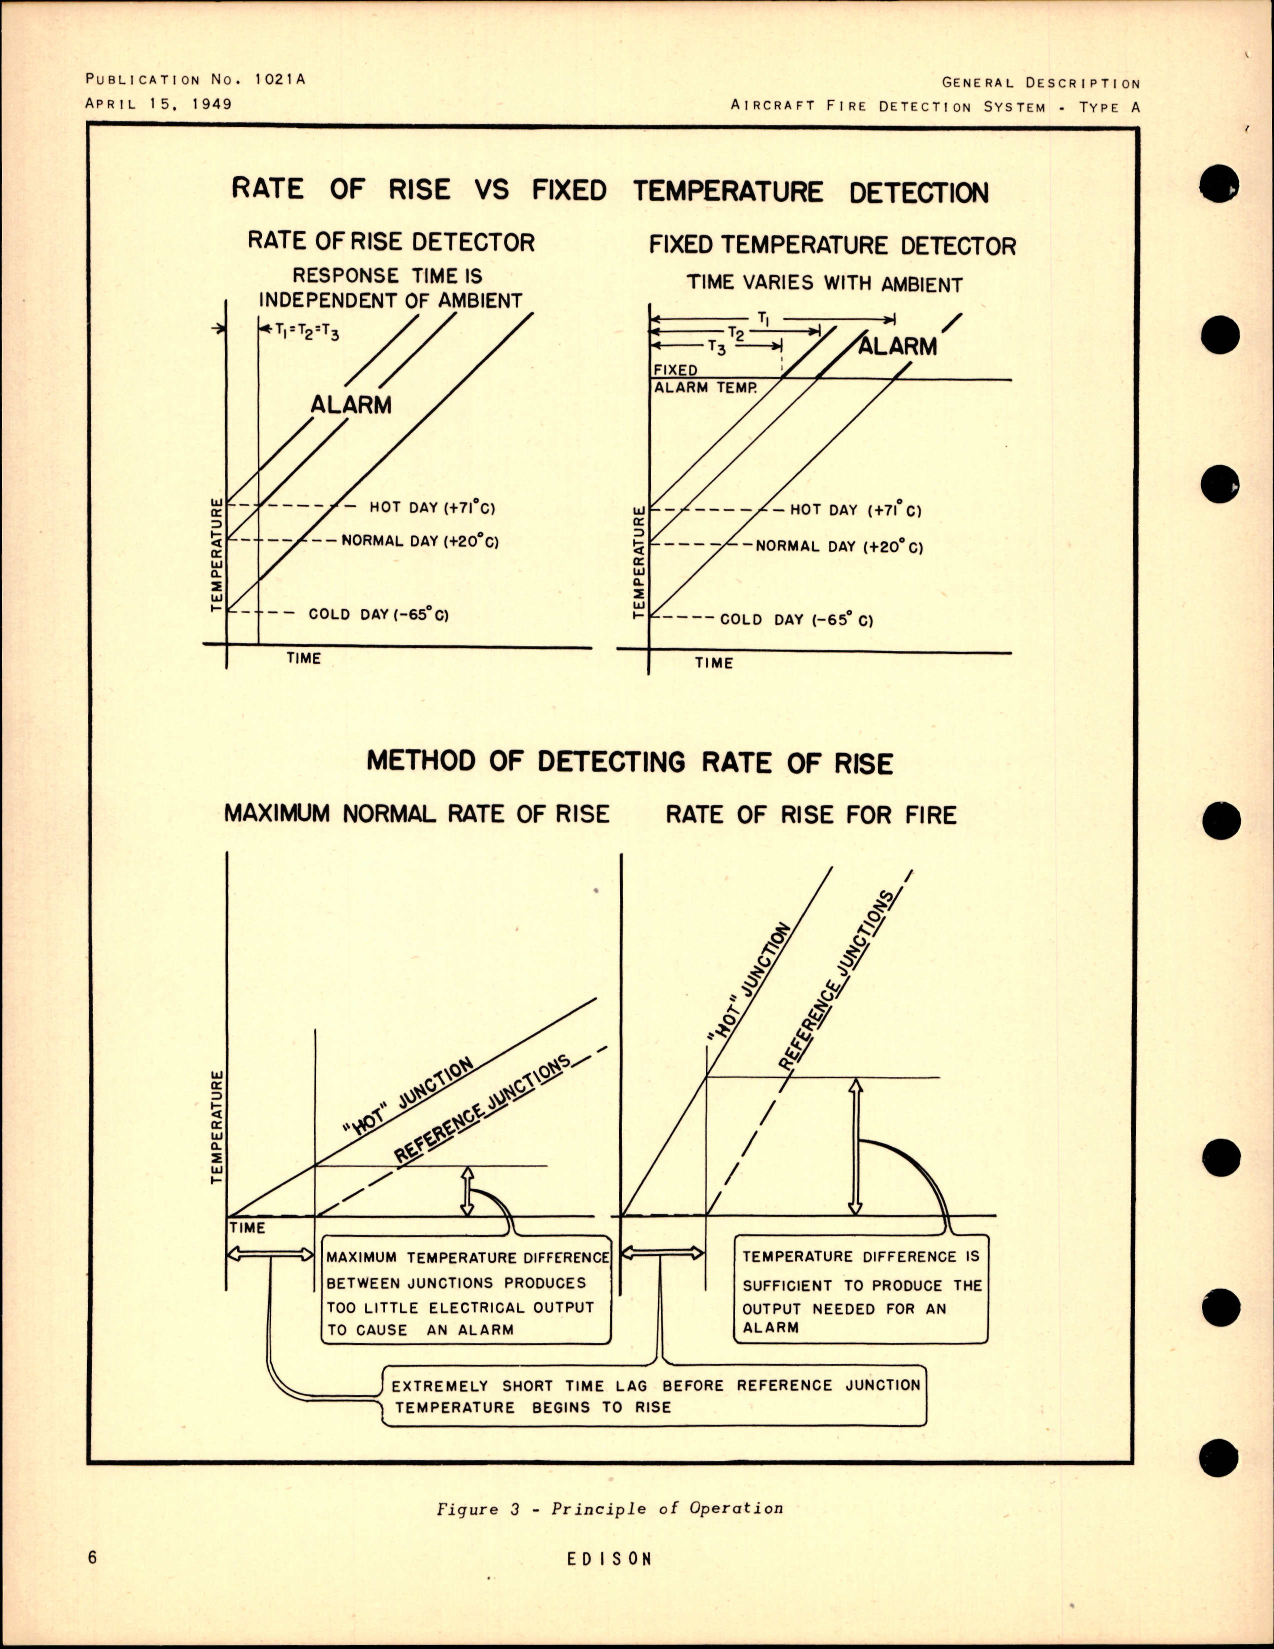 Sample page 8 from AirCorps Library document: Service Manual No. 502 for Aircraft Fire Detection System Type A